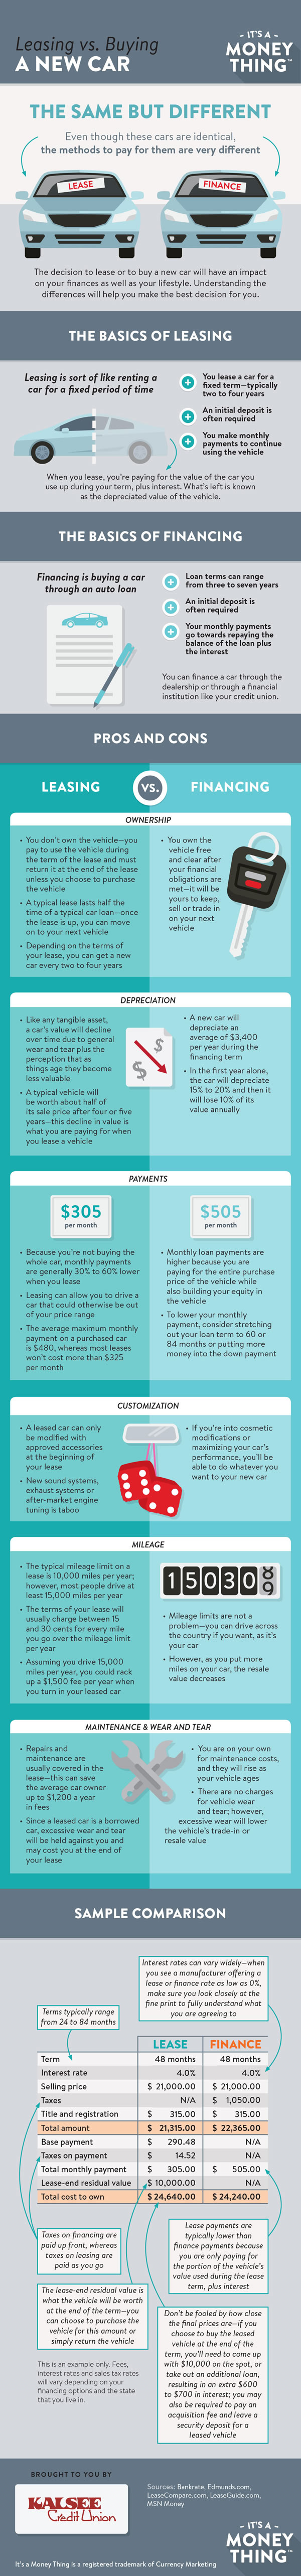 Leasing vs buying a new car infographic, click for transcription